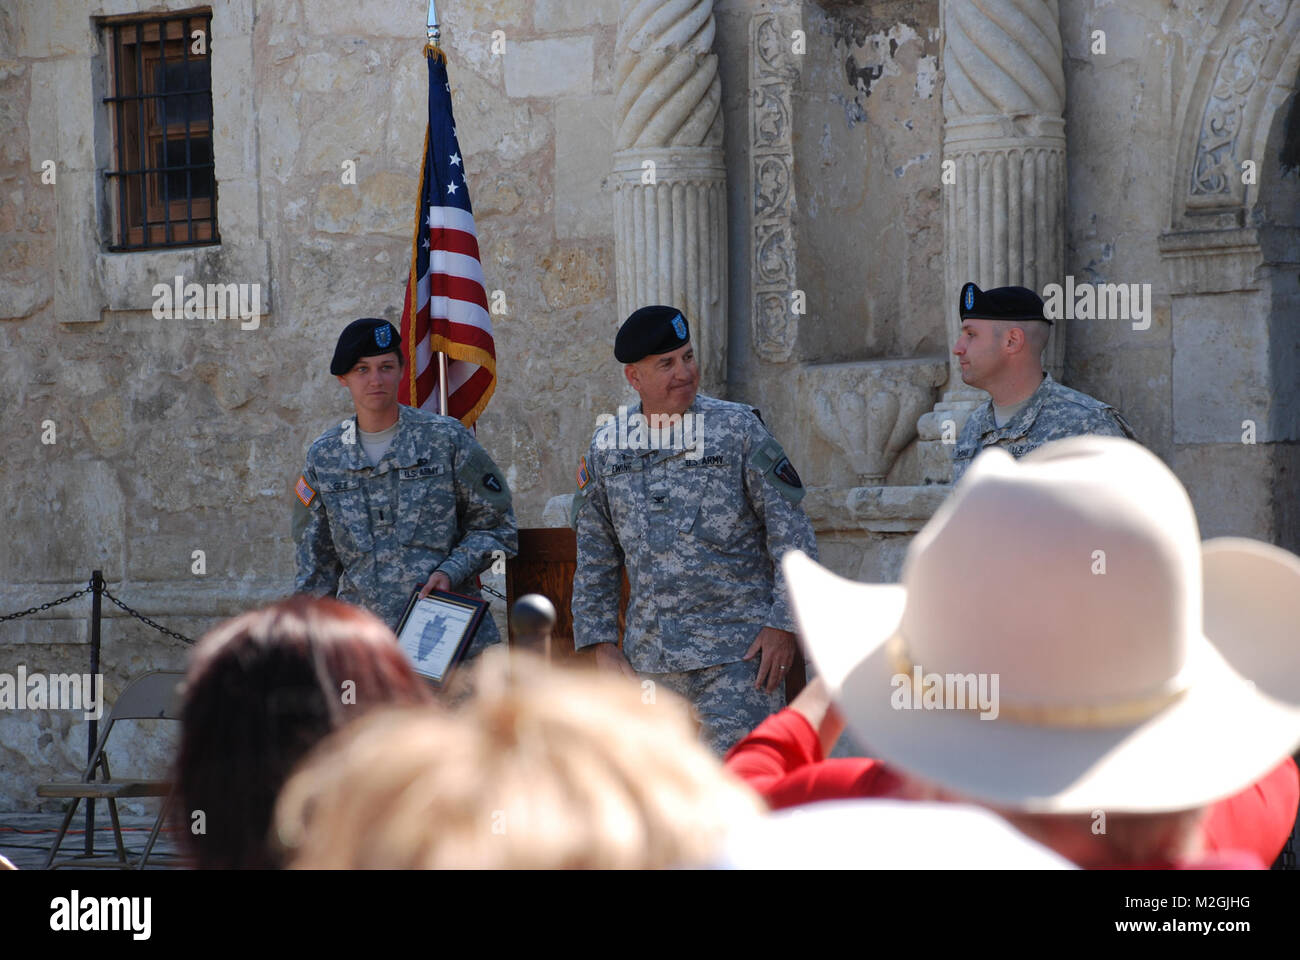 San Antonio, Texas (25 Apr 2010) --  Members of the Texas Army National Guard 162nd Area Support Medical Company render a salute during a deployment ceremony conducted here Sunday at the Alamo.  The 162nd Area Support Medical Company will provide critical care to military members on the battlefield.  The honored guest speaker, Brig. Gen. Joyce L. Stevens acknowledged and thanked the Soldiers for their selfless services to their nation.  (Photo:  SPC Maria Moy, JFTX-PAO) Chaplain Robert F. Ewing by Texas Military Department Stock Photo